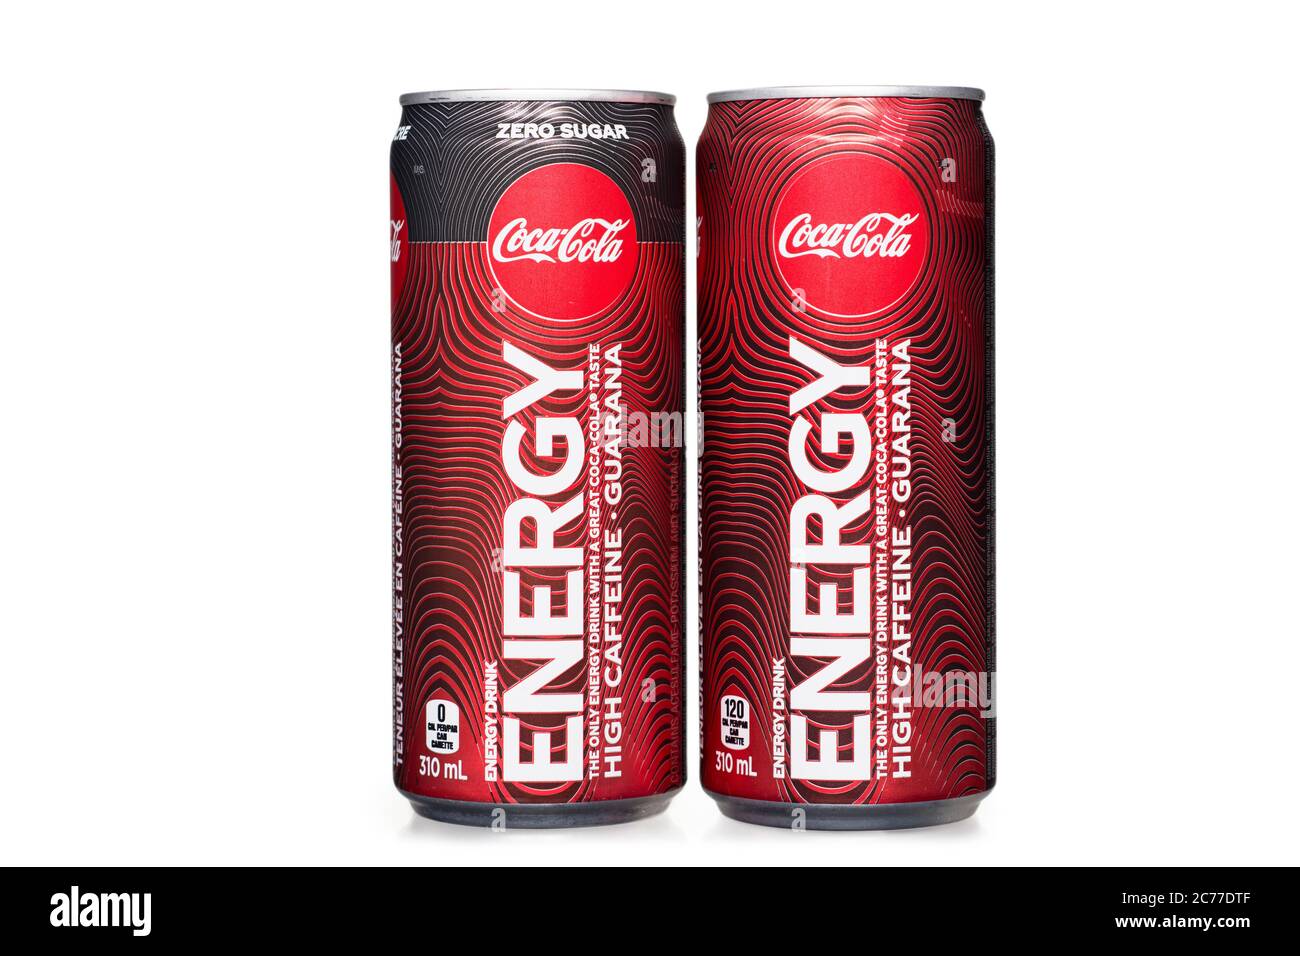 Energy Drinks, Energy Drink Cans Stock Photo